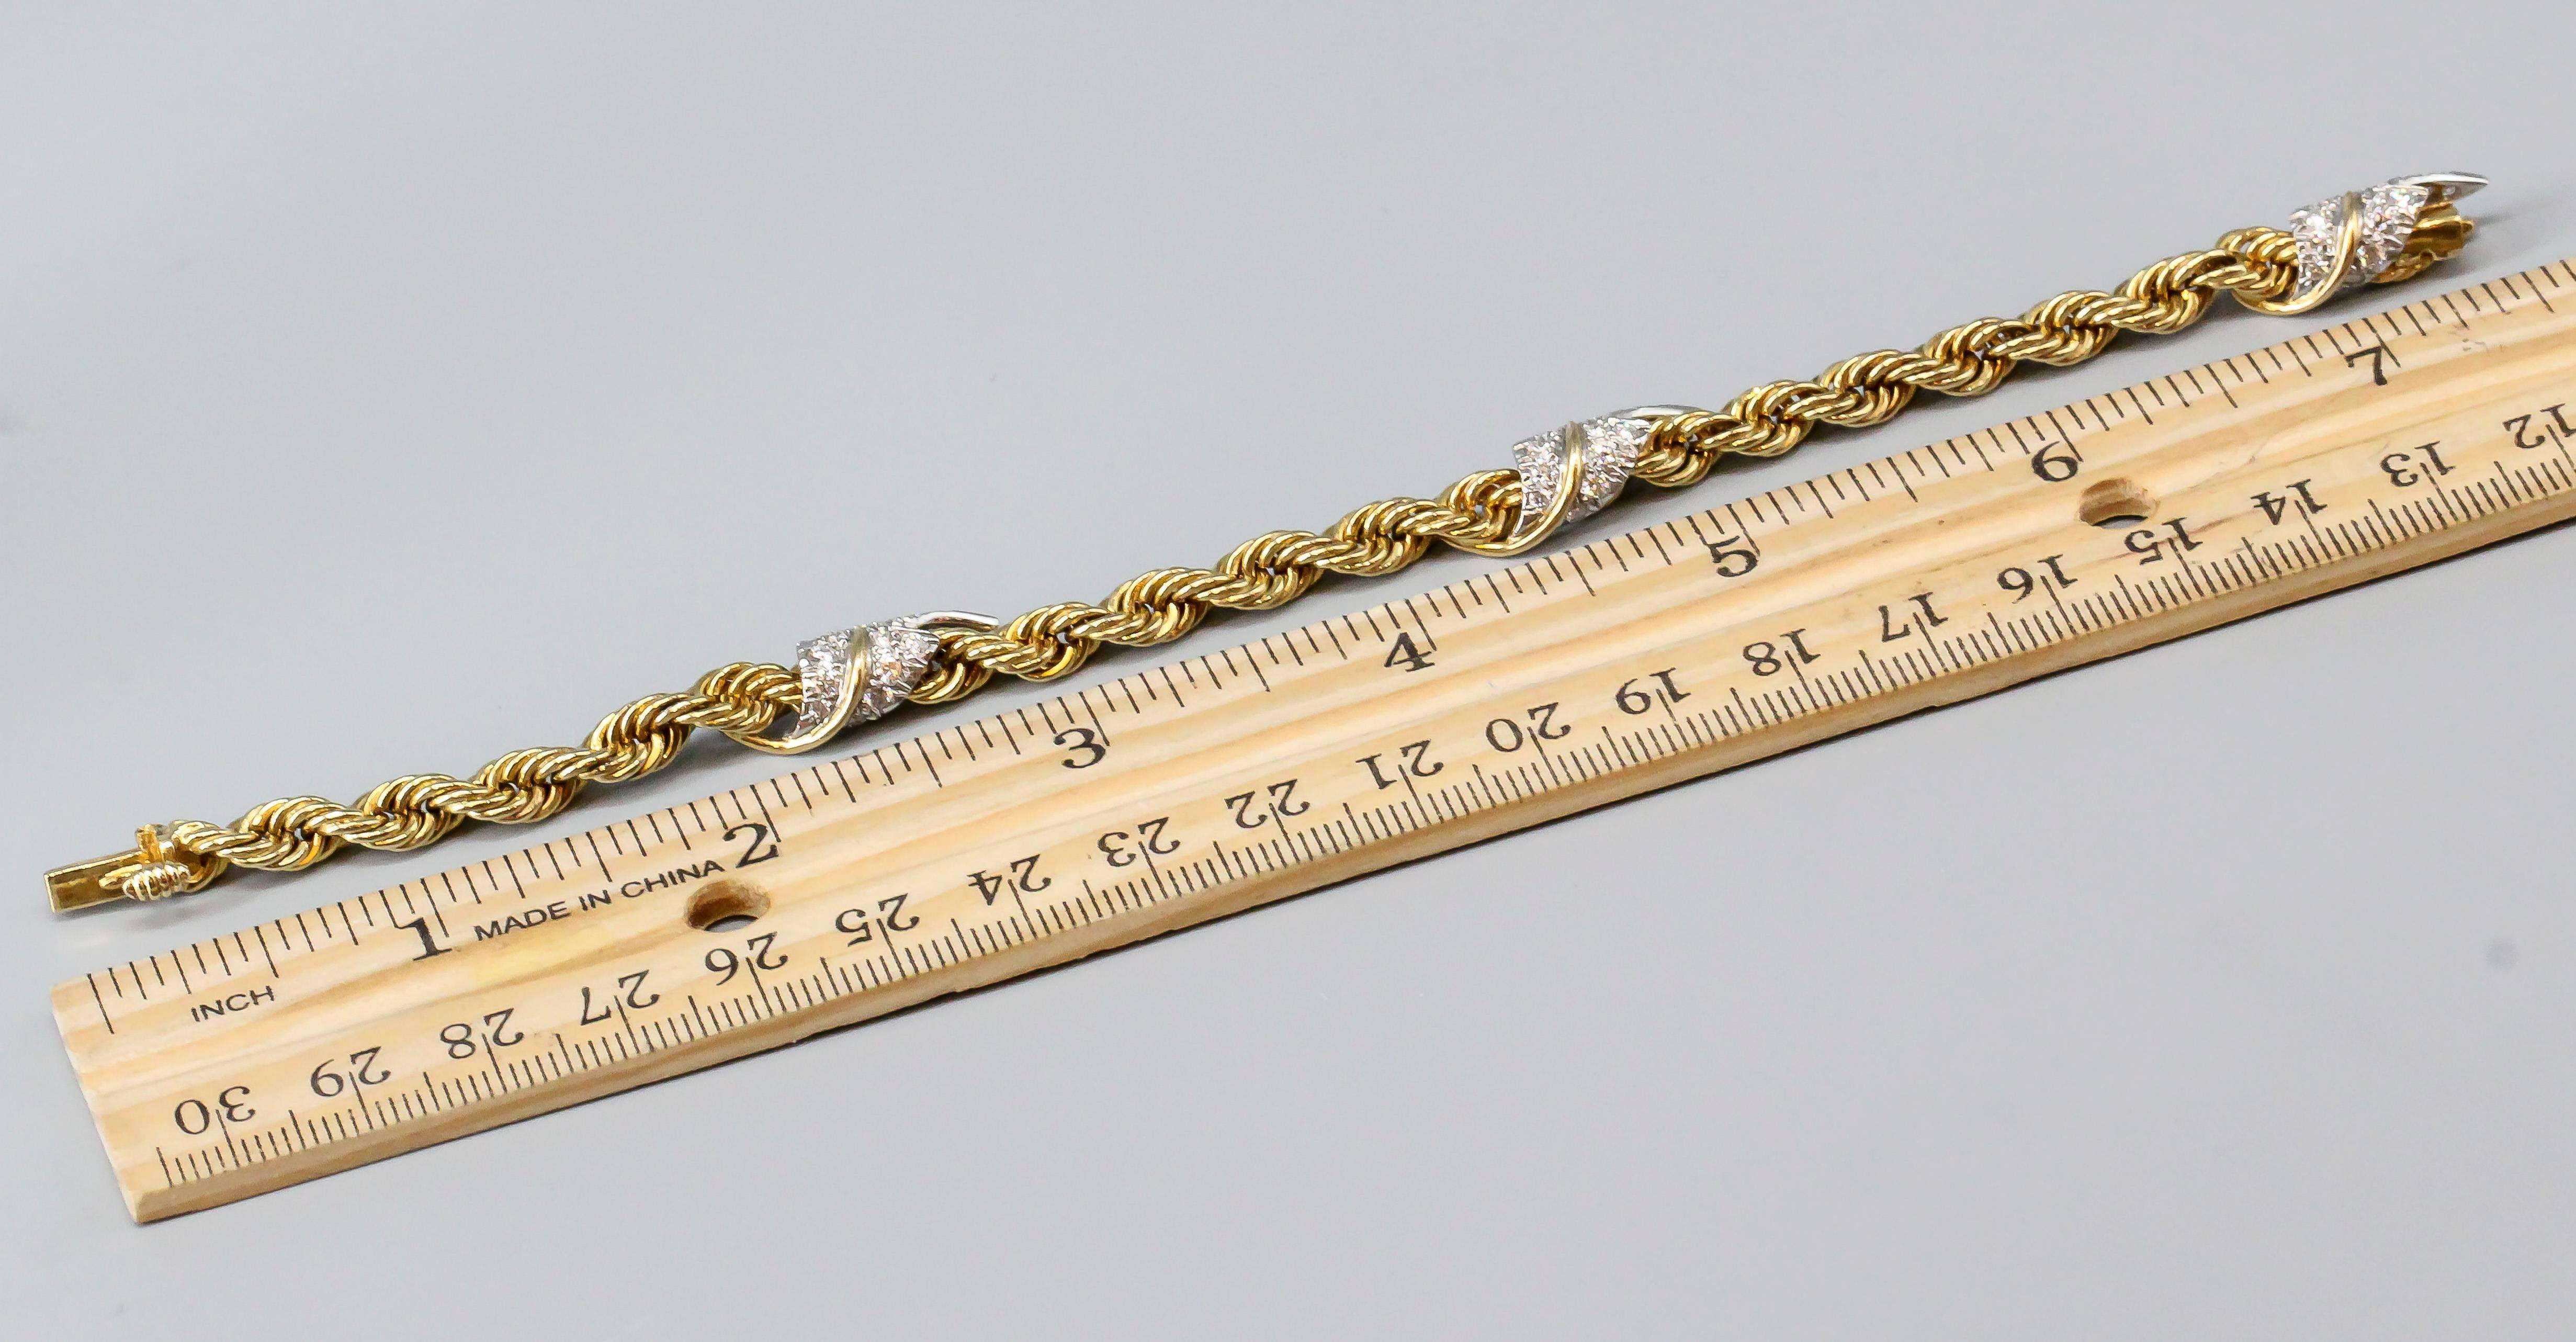 Elegant diamond and 18K yellow gold bracelet by Tiffany & Co. Schlumberger. It features high grade round brilliant cut diamonds set on platinum leaves wrapped around a twisted rope style link. Exceptionally made and easily wearable. 

Hallmarks: